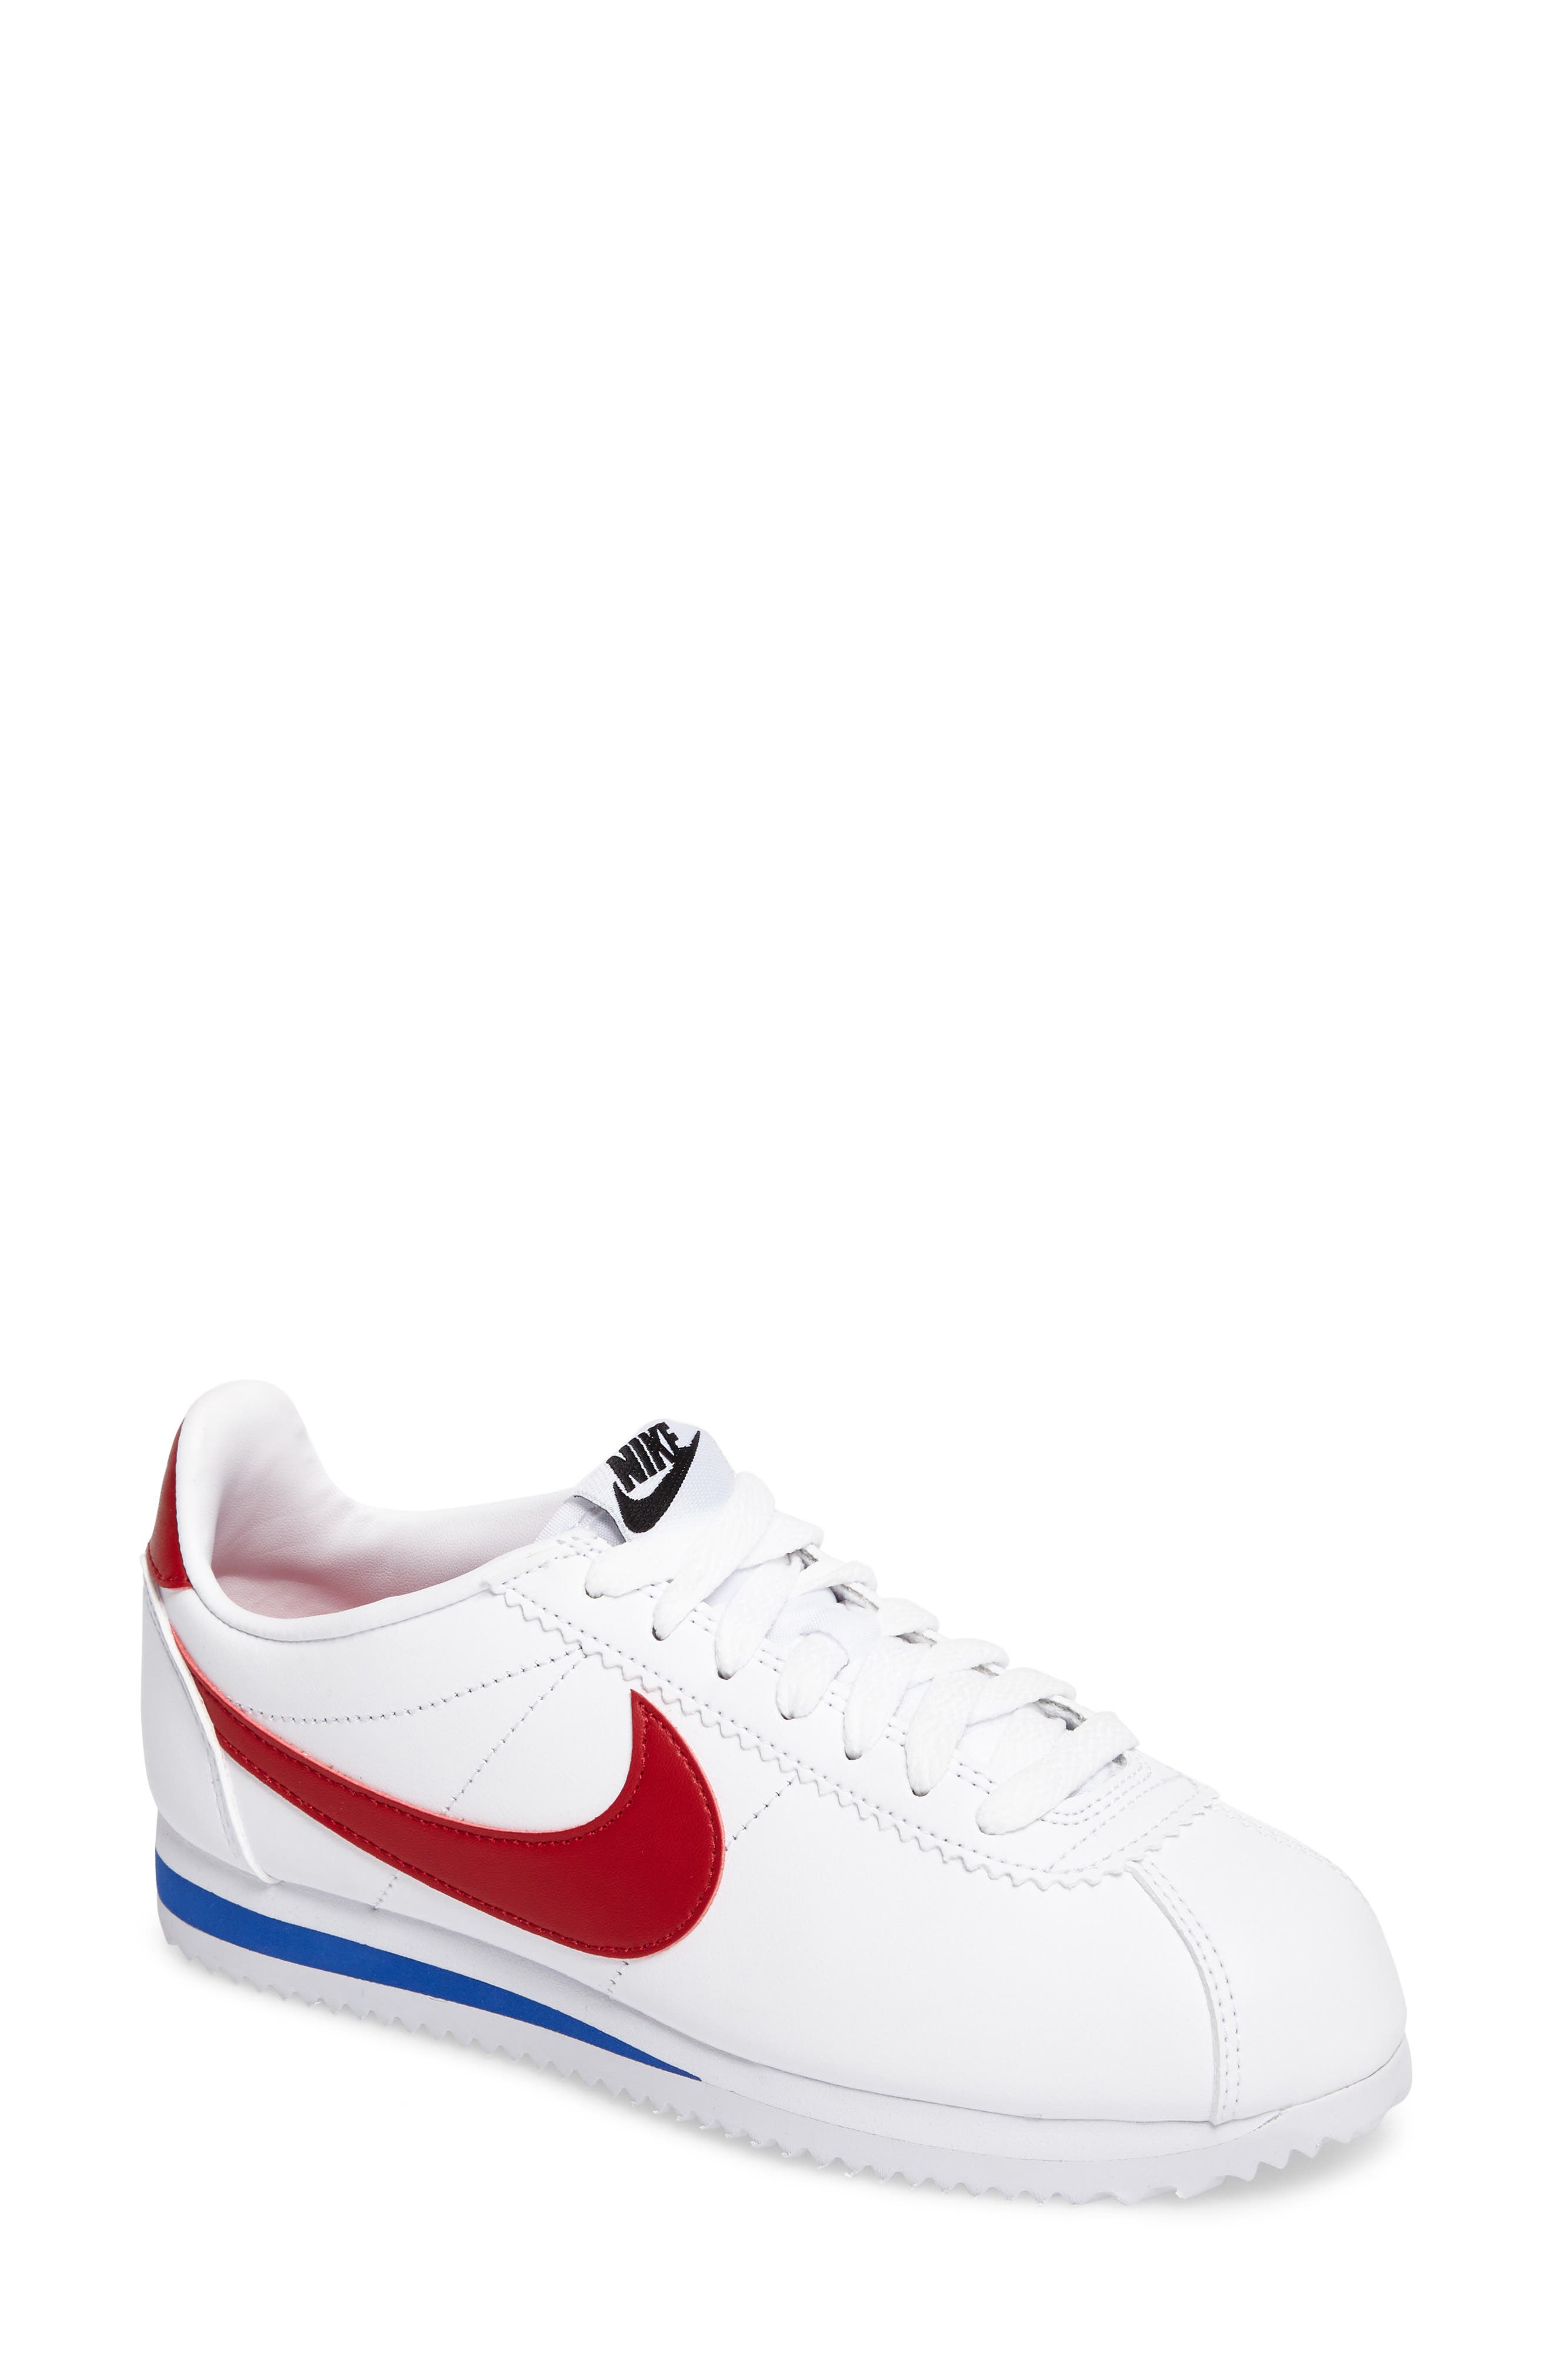 blue and red cortez